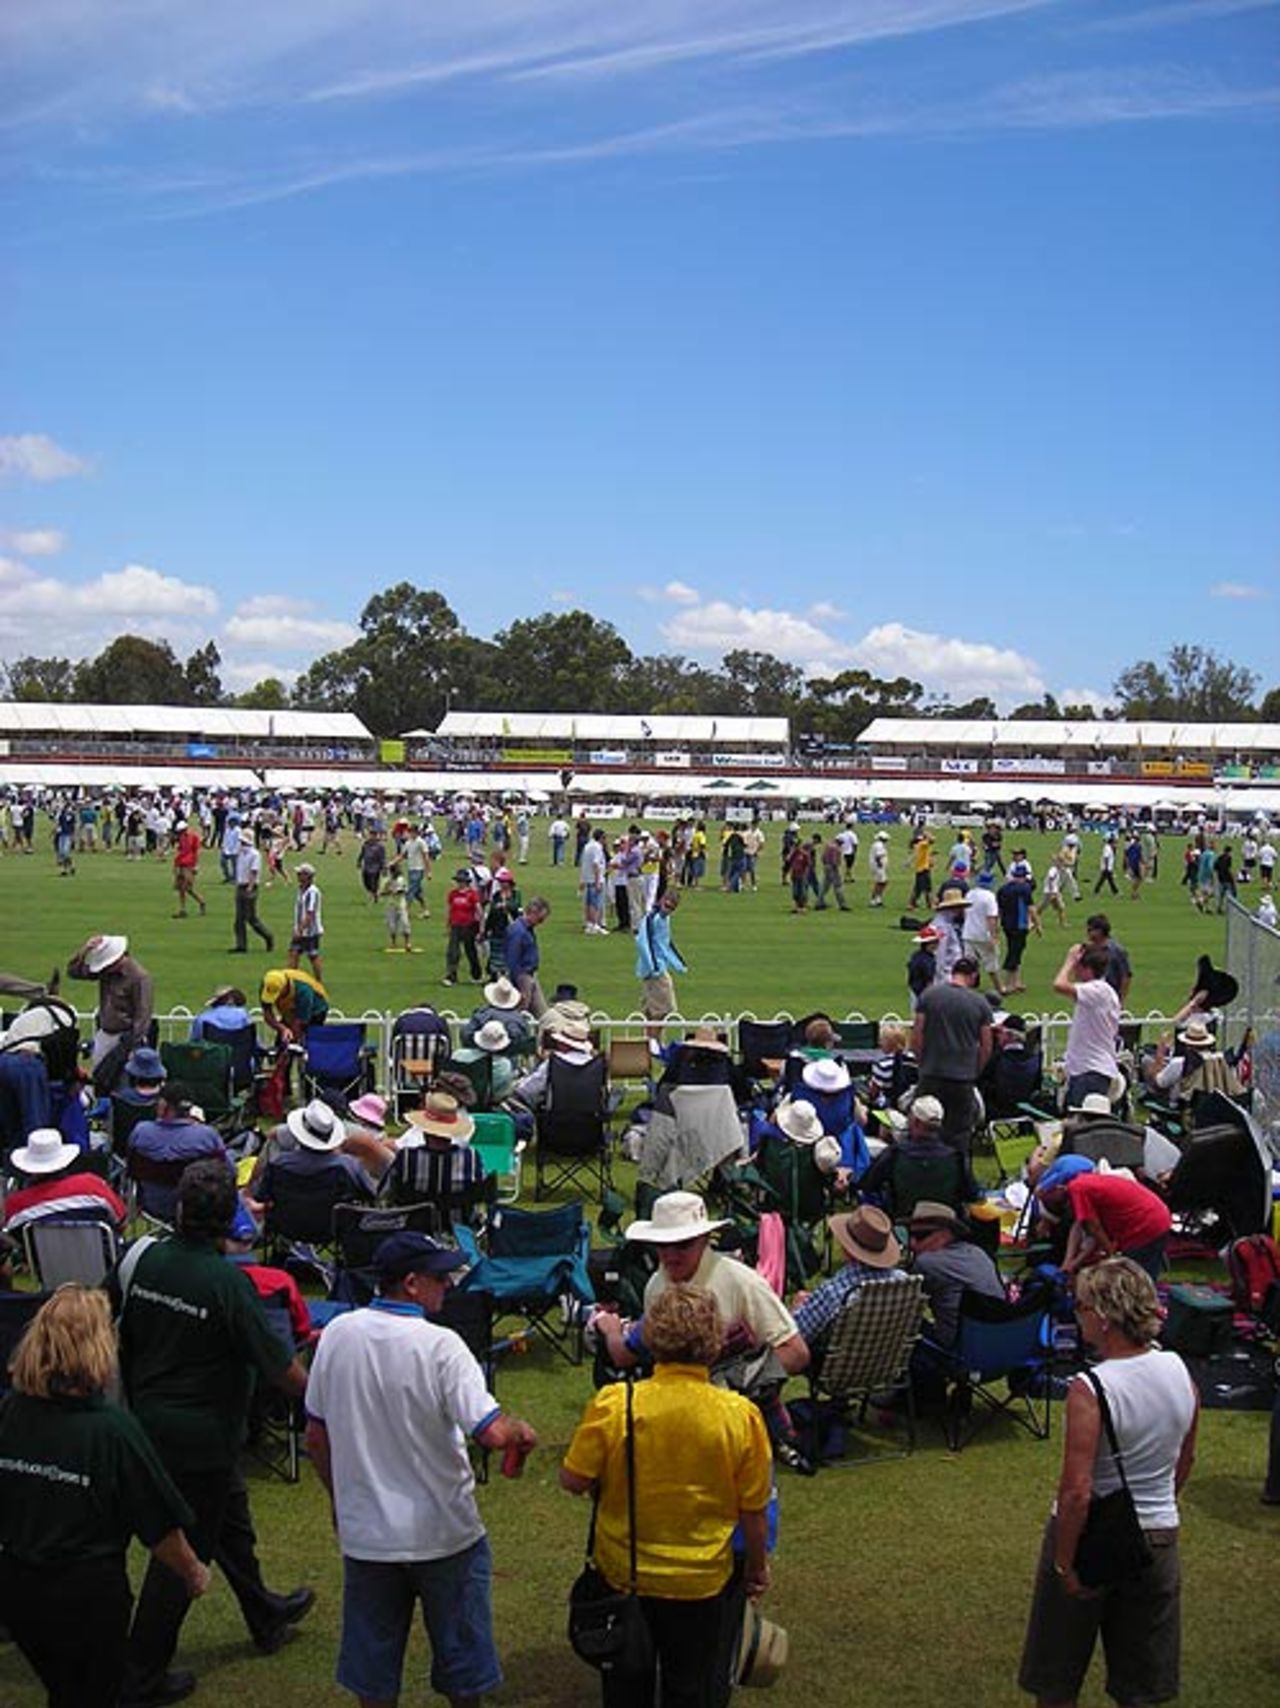 The sell-out crowd at the annual Lilac Hill festival match, Cricket Australia Chairman's XI v England XI, Lilac Hill, Perth, December 8, 2006